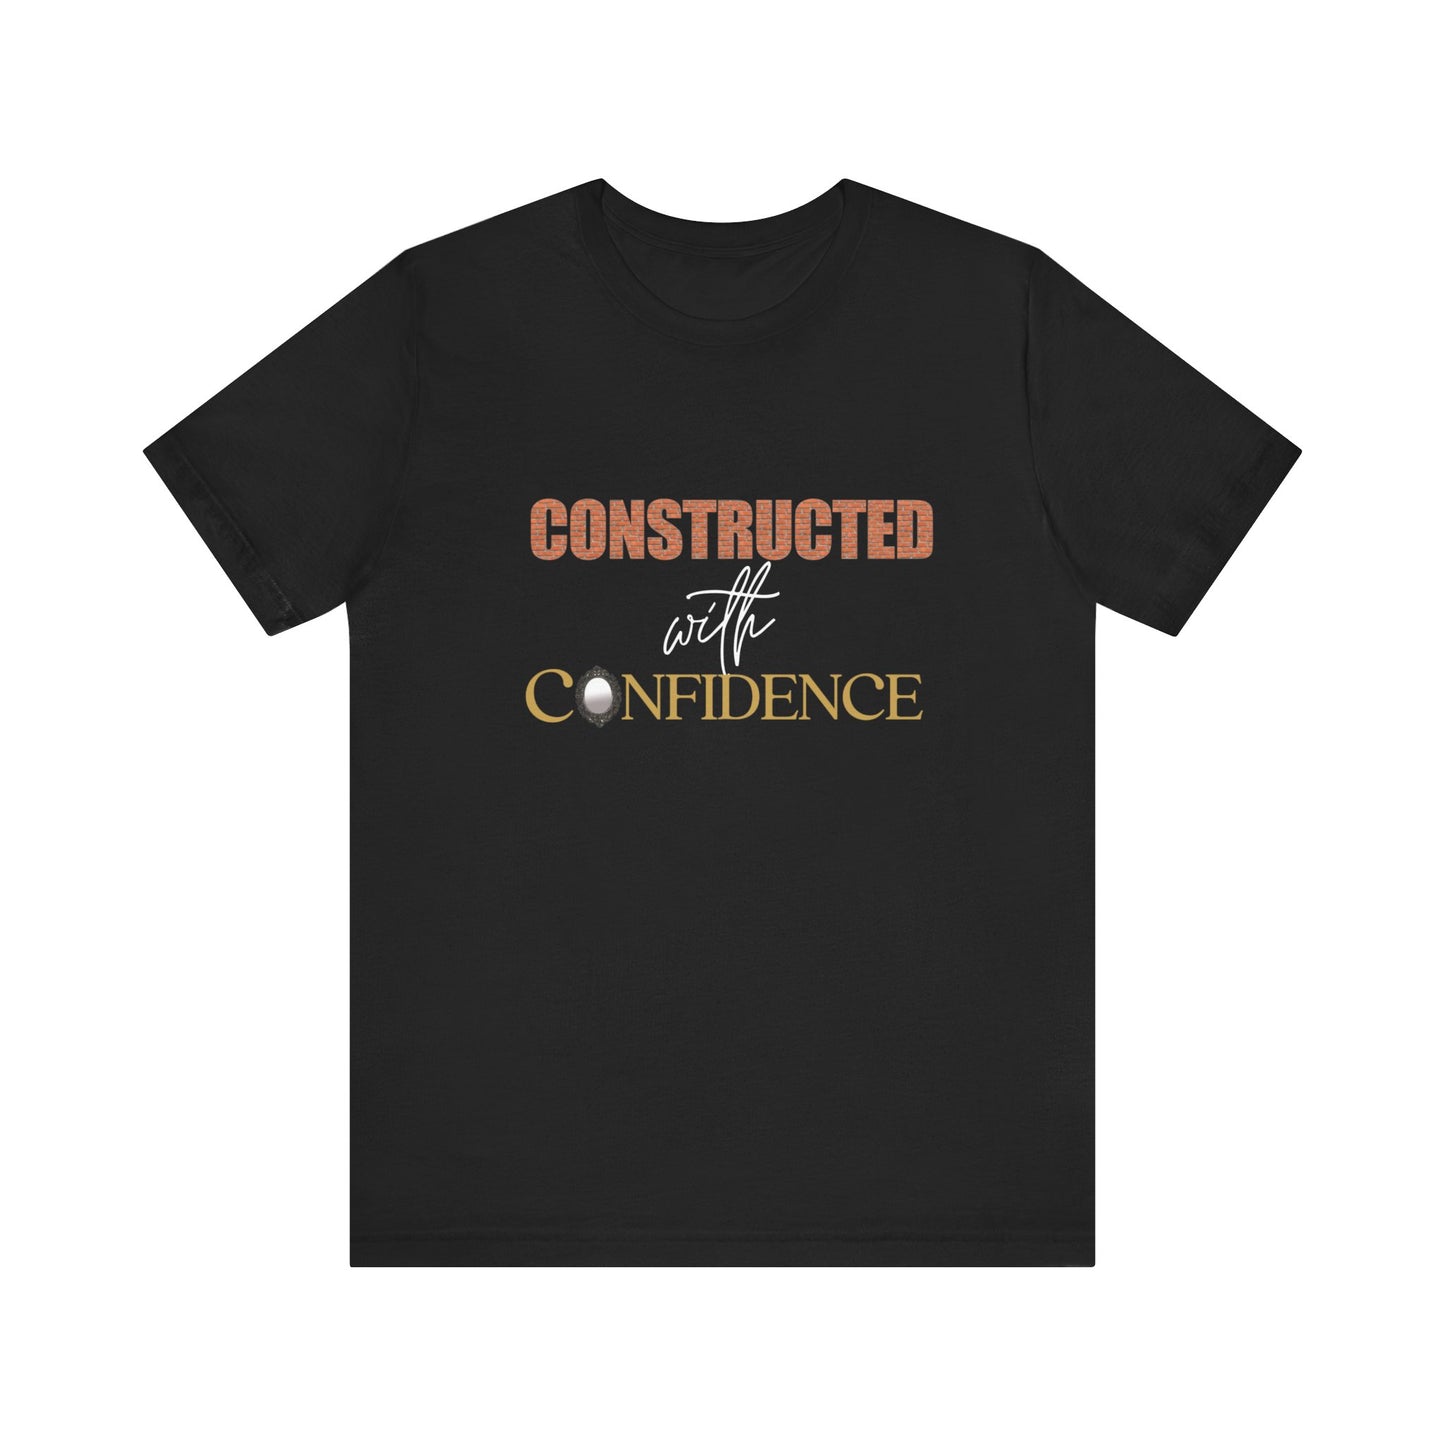 Constructed with confidence